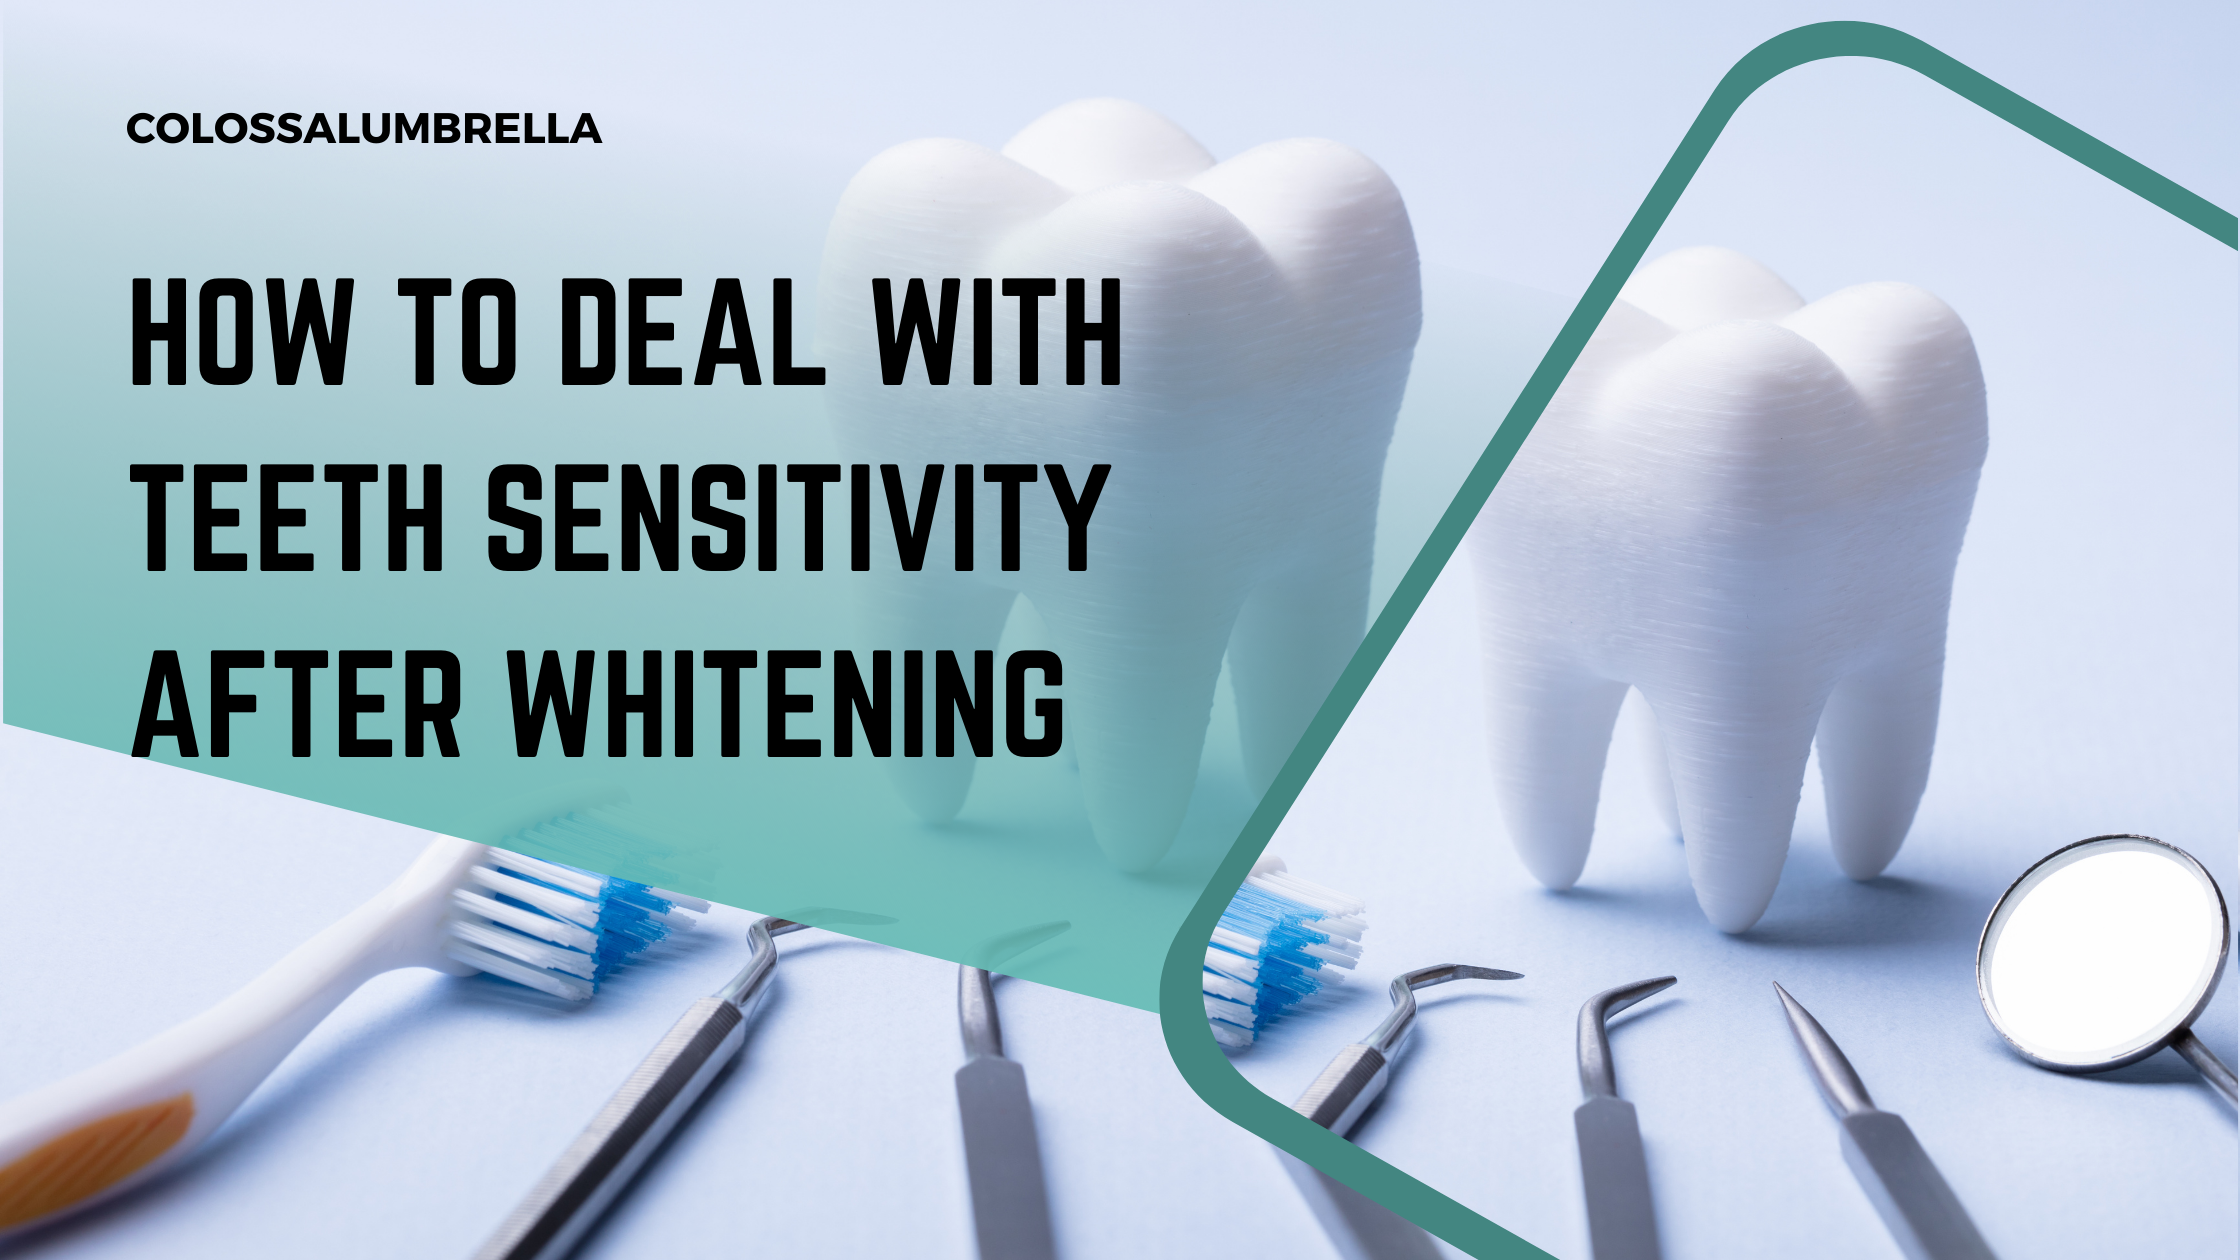 9 Easy tips on how to deal with teeth sensitivity after whitening